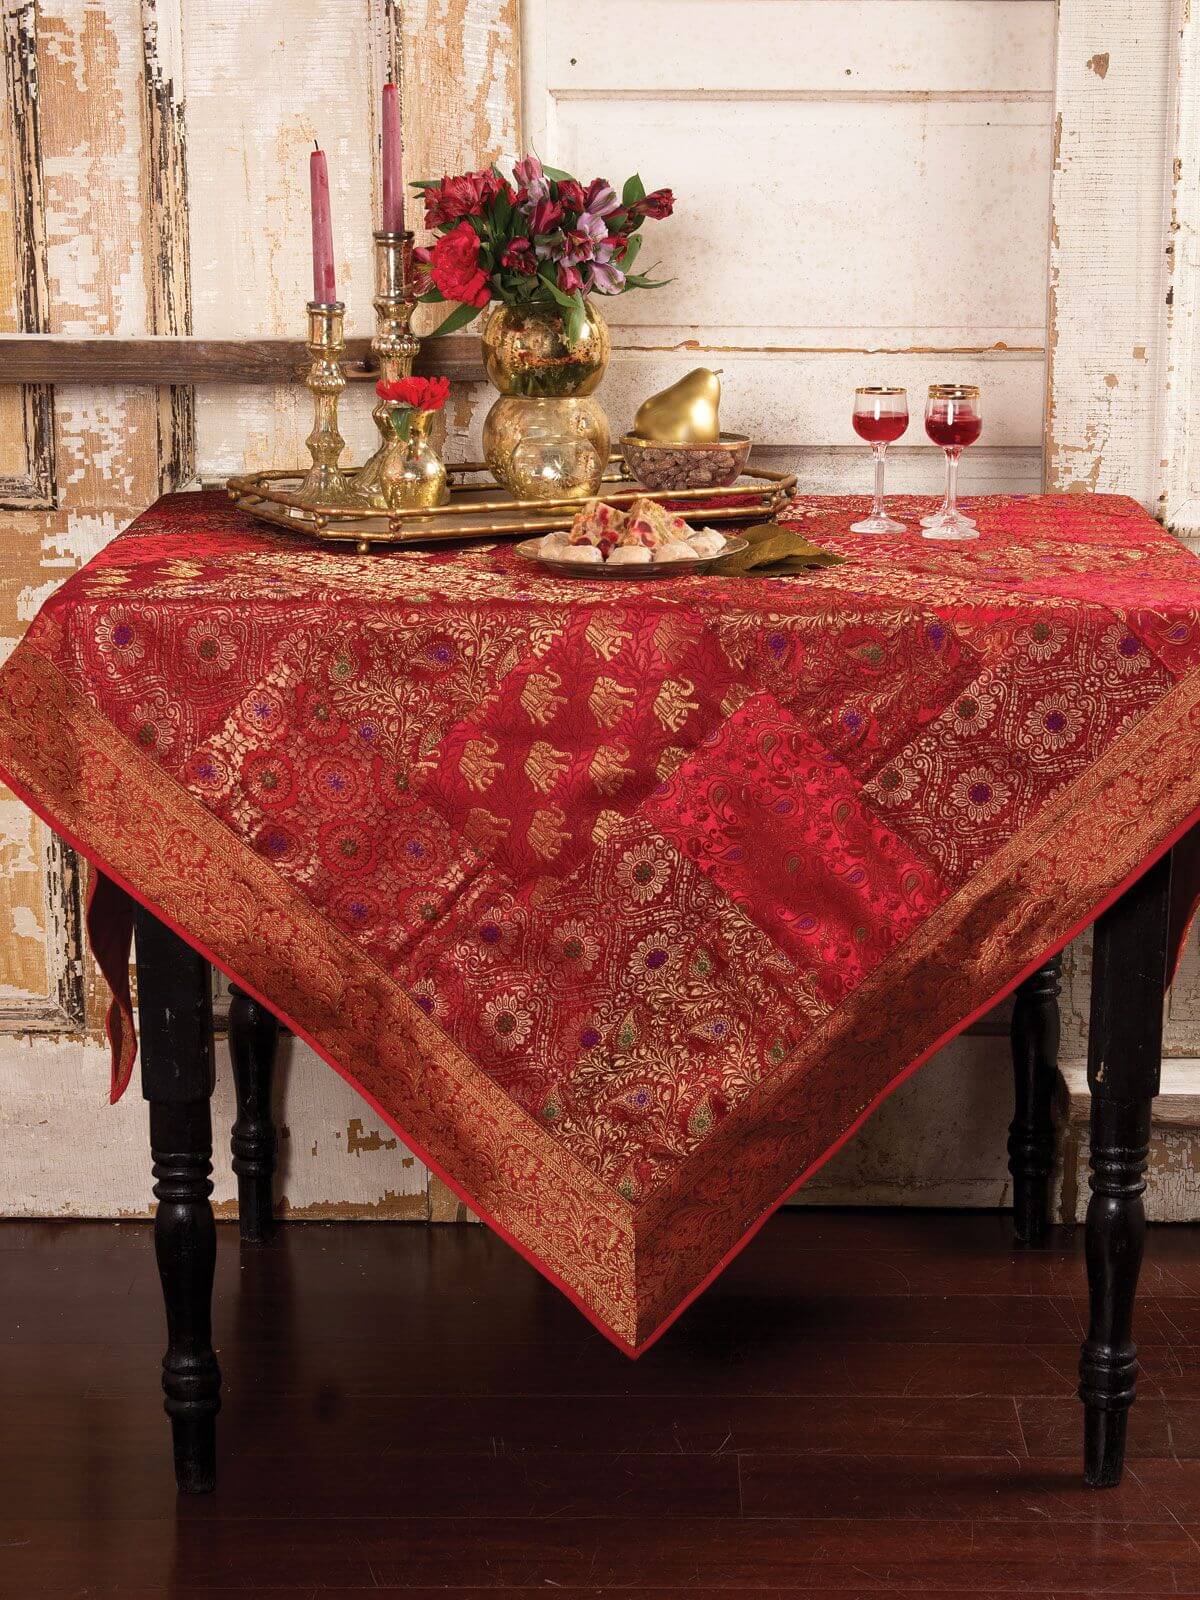 Bring Some Luxe Vibes To Your Space With Brocade This Festive Season